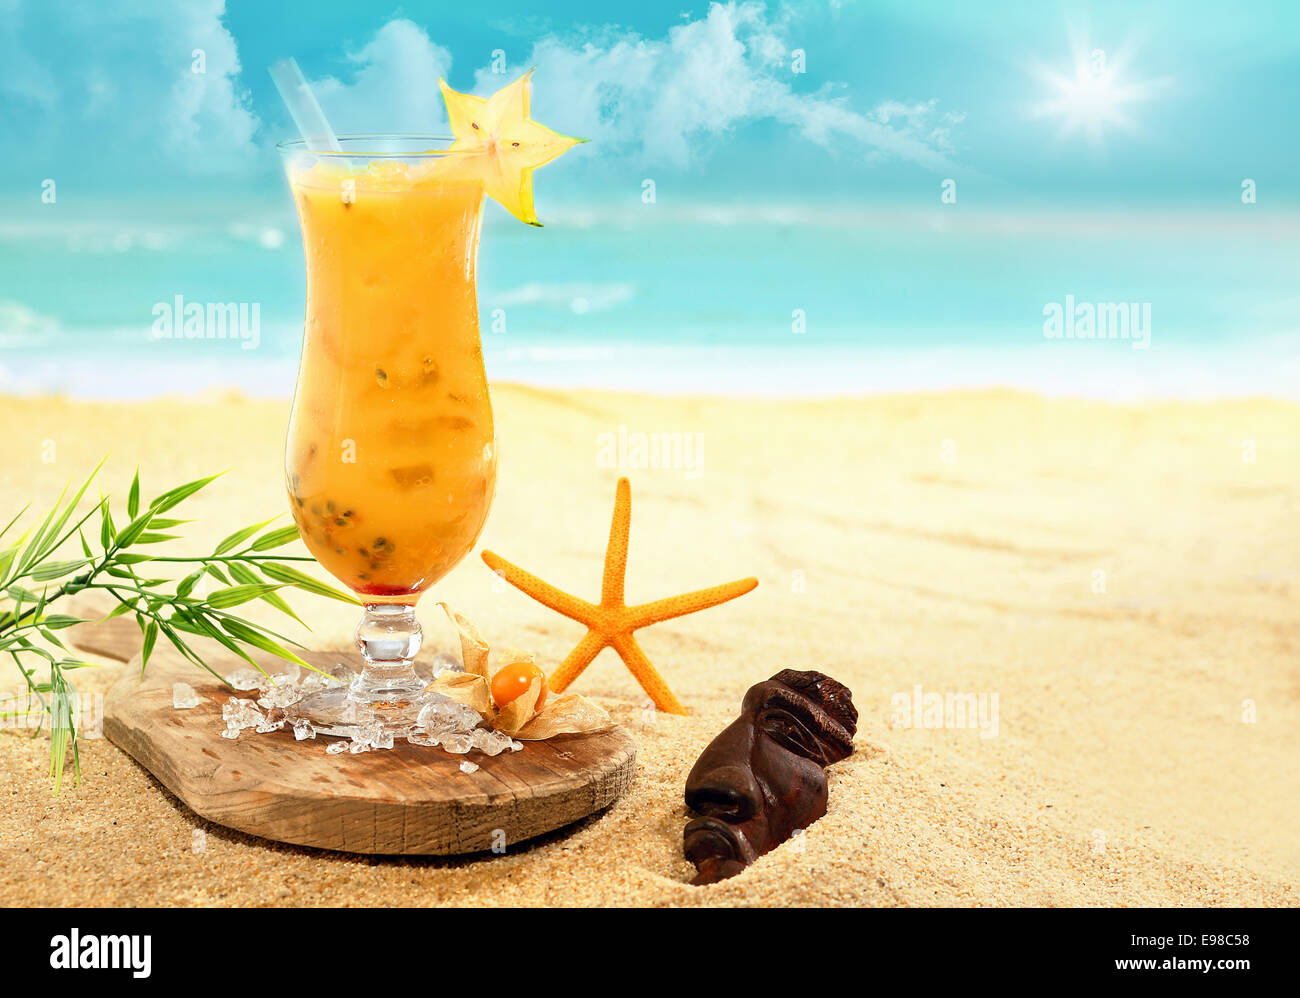 Colourful carambola and orange cocktail ina tall glass served on a wooden board on a golden beach at a tropical holiday resort during an enjoyable summer vacation Stock Photo